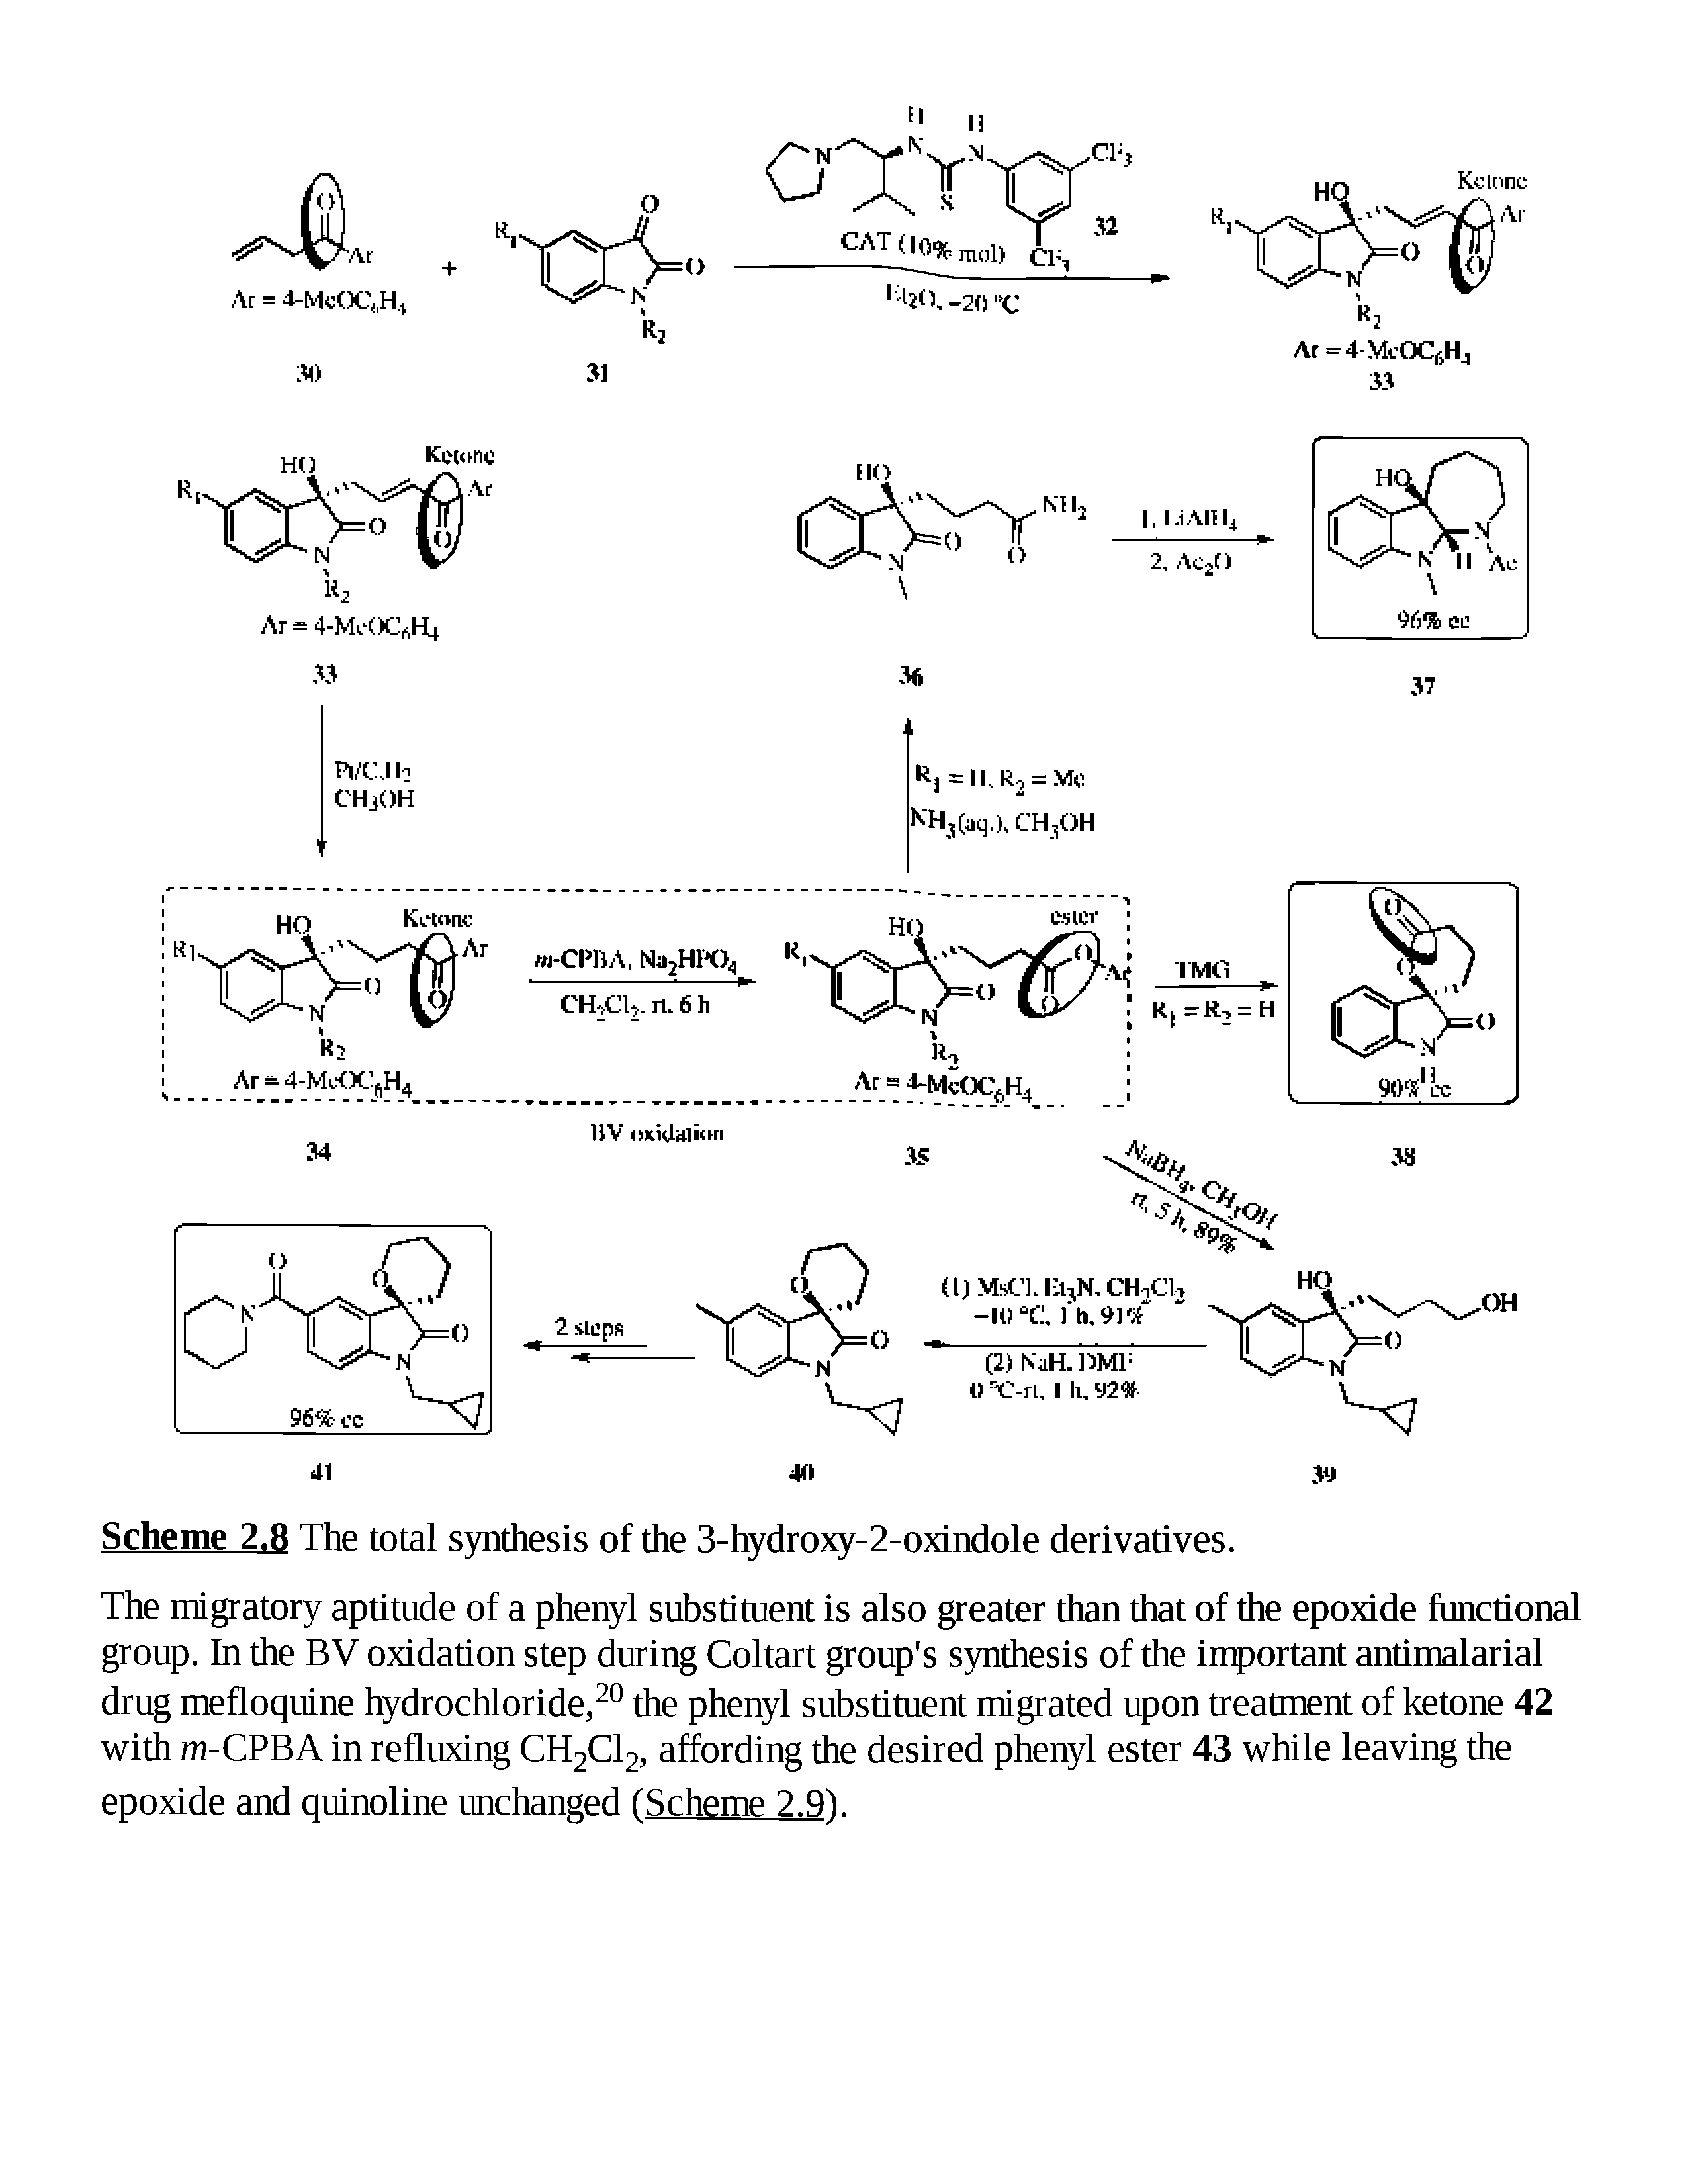 Scheme 2.8 The total synthesis of the 3-hydroxy-2-oxindole derivatives.